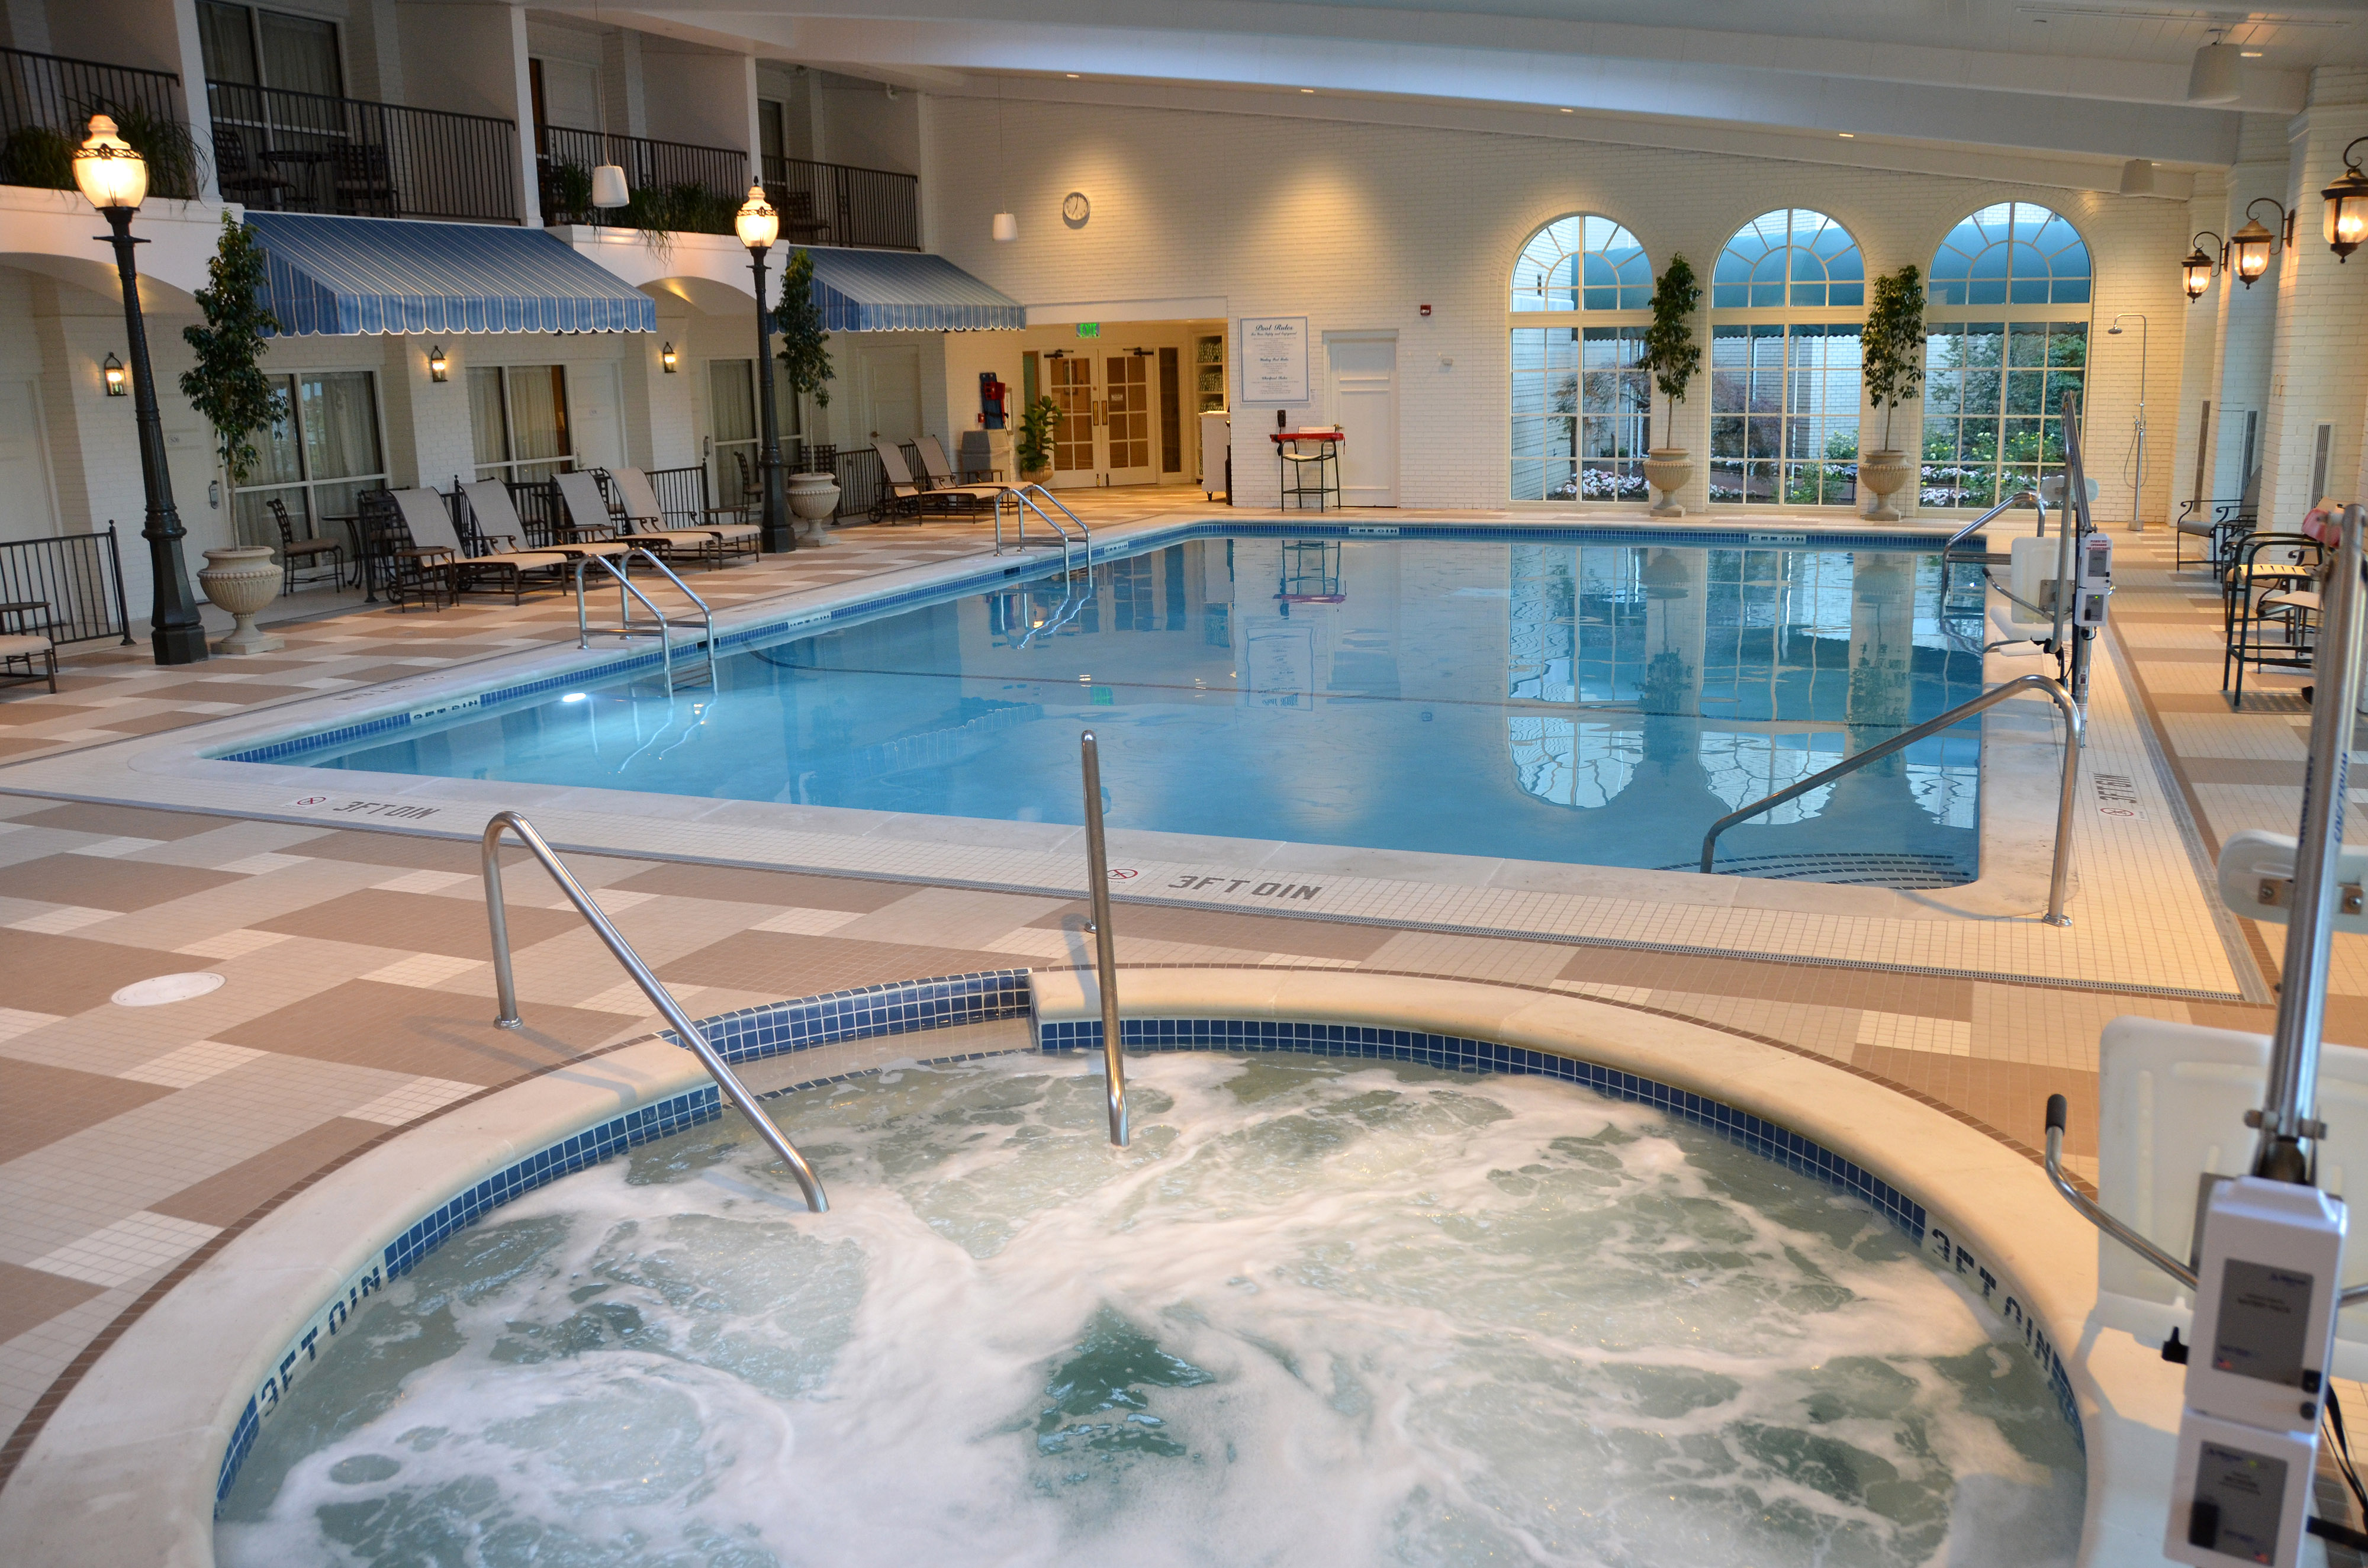 The indoor pool at Hershey Hotel